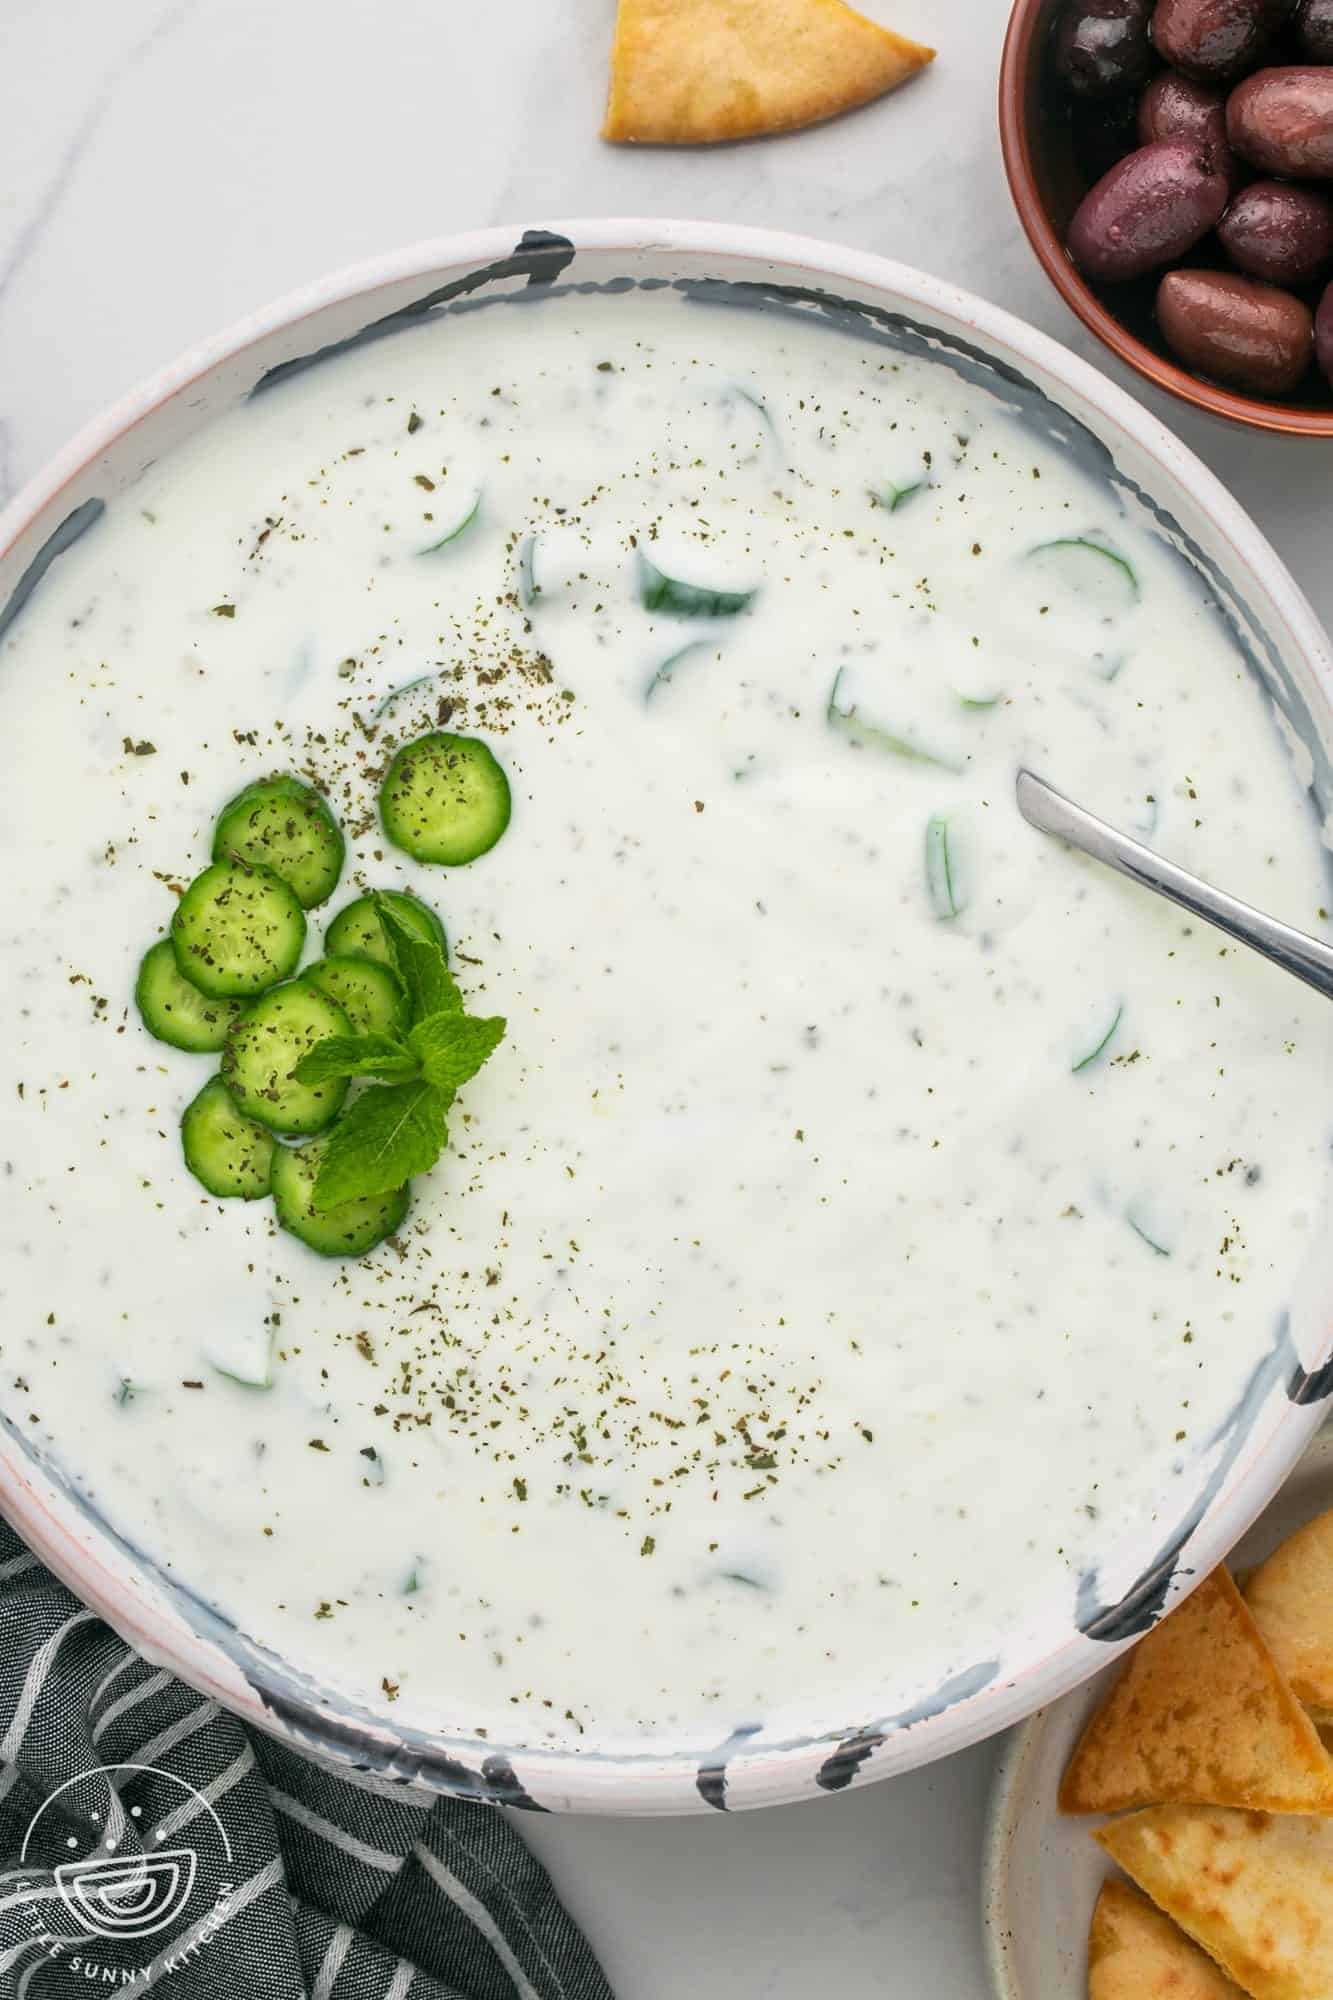 Overhead shot of khyar bi laban, or cucumber yogurt sauce in a large bowl, with kalmata olives on the side and pita chips.